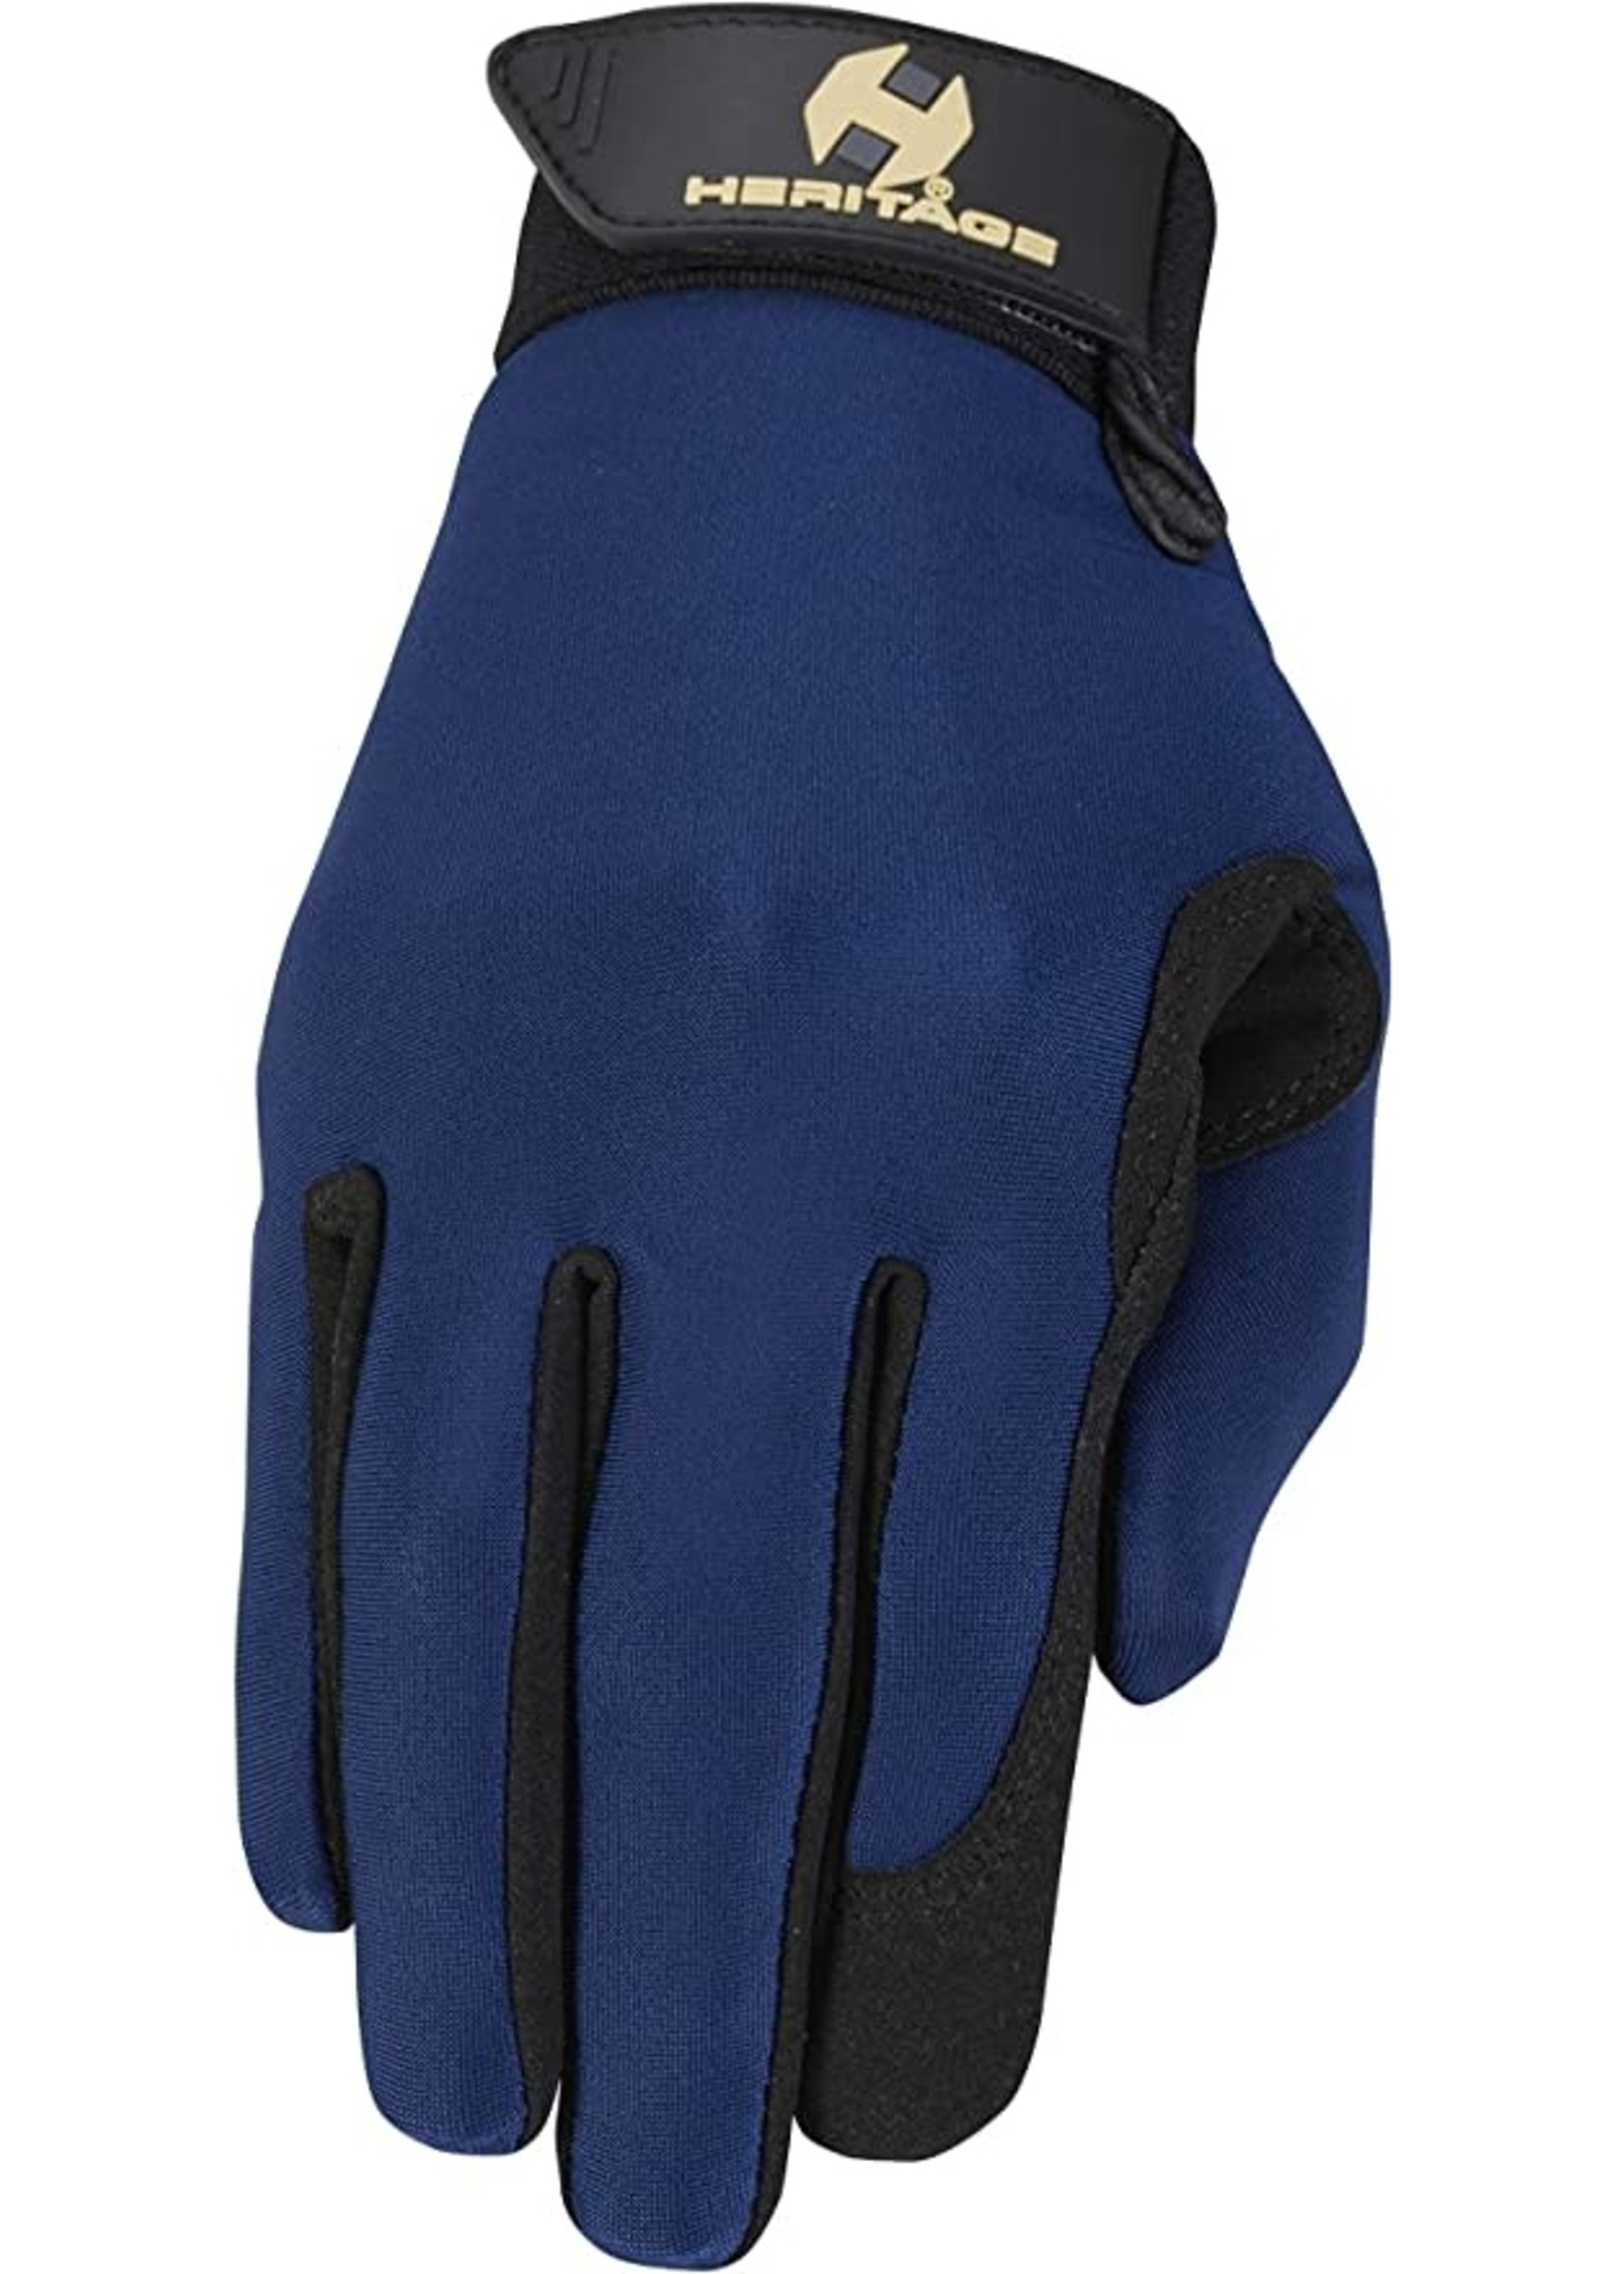 Heritage Products Heritage Performance Glove